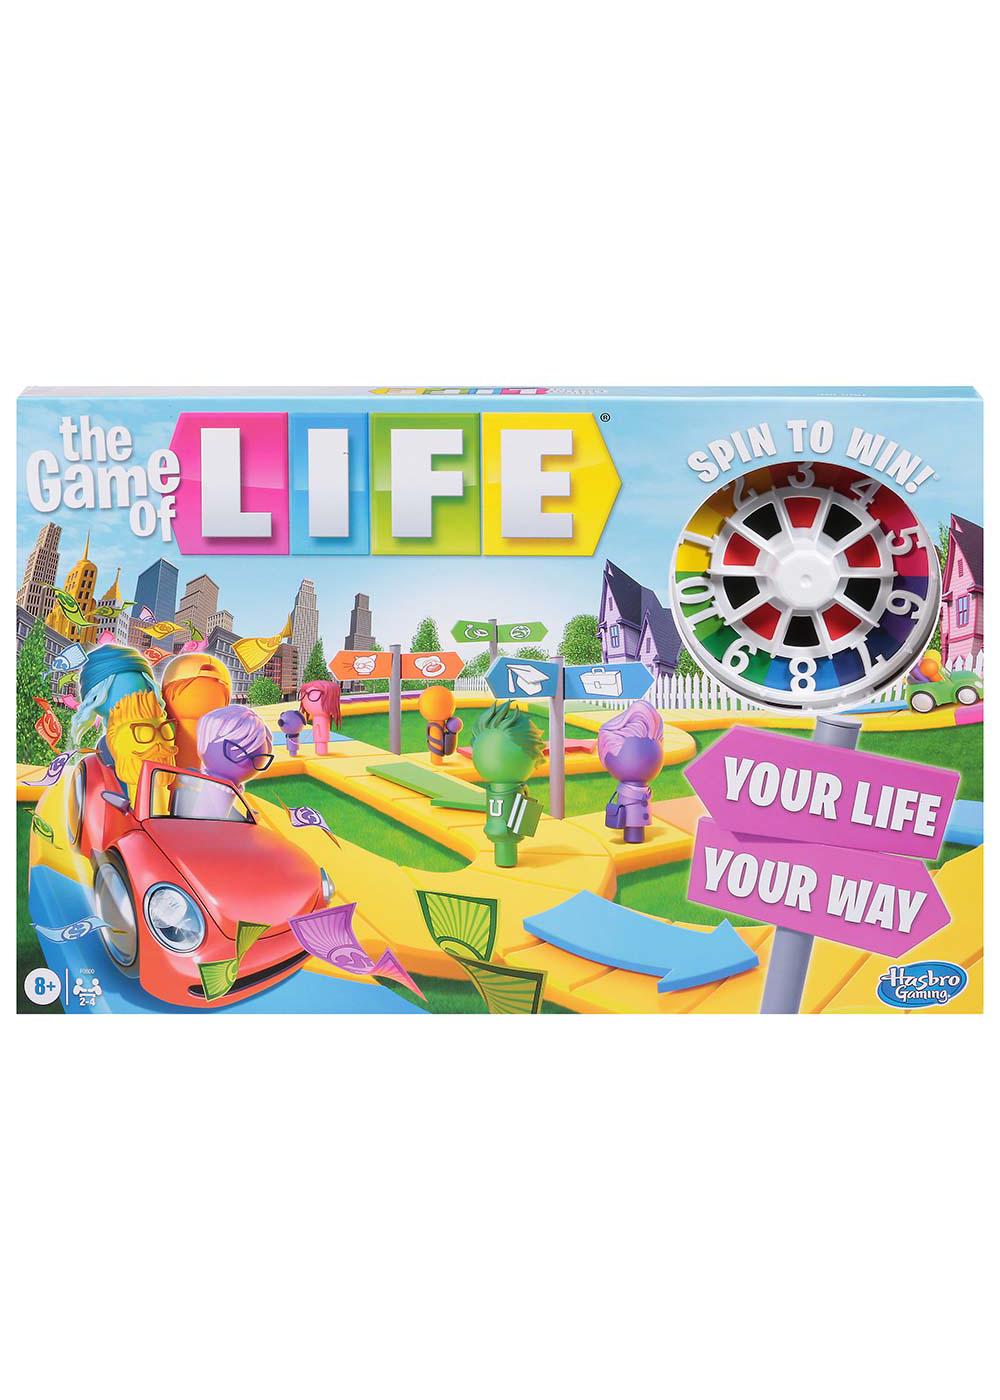 Hasbro The Game Of Life Family Board Game - Shop Games at H-E-B